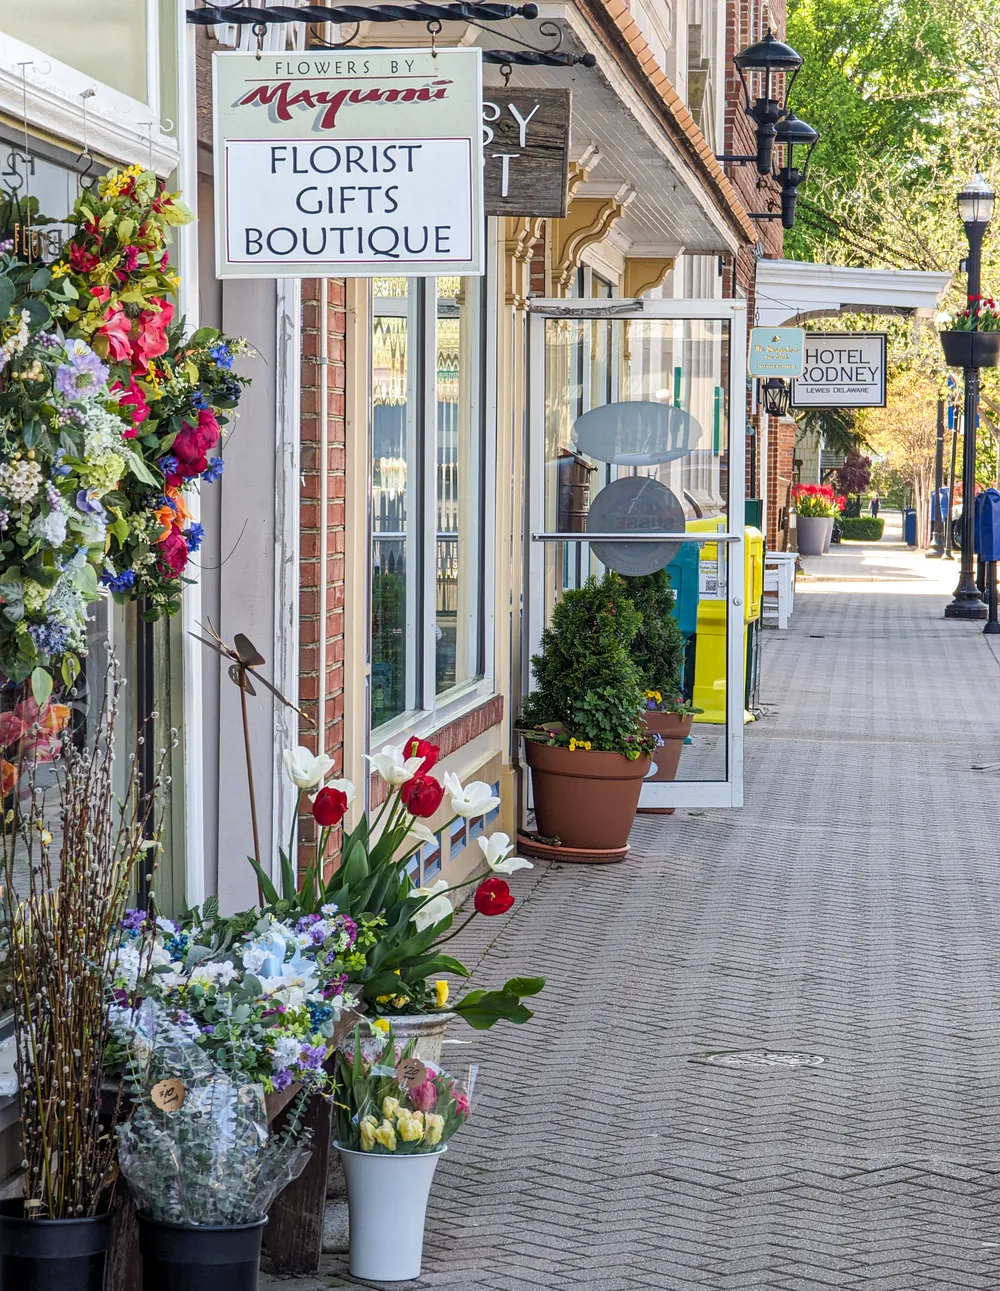 The quaint town of Lewes, Delaware. The many shops in town.